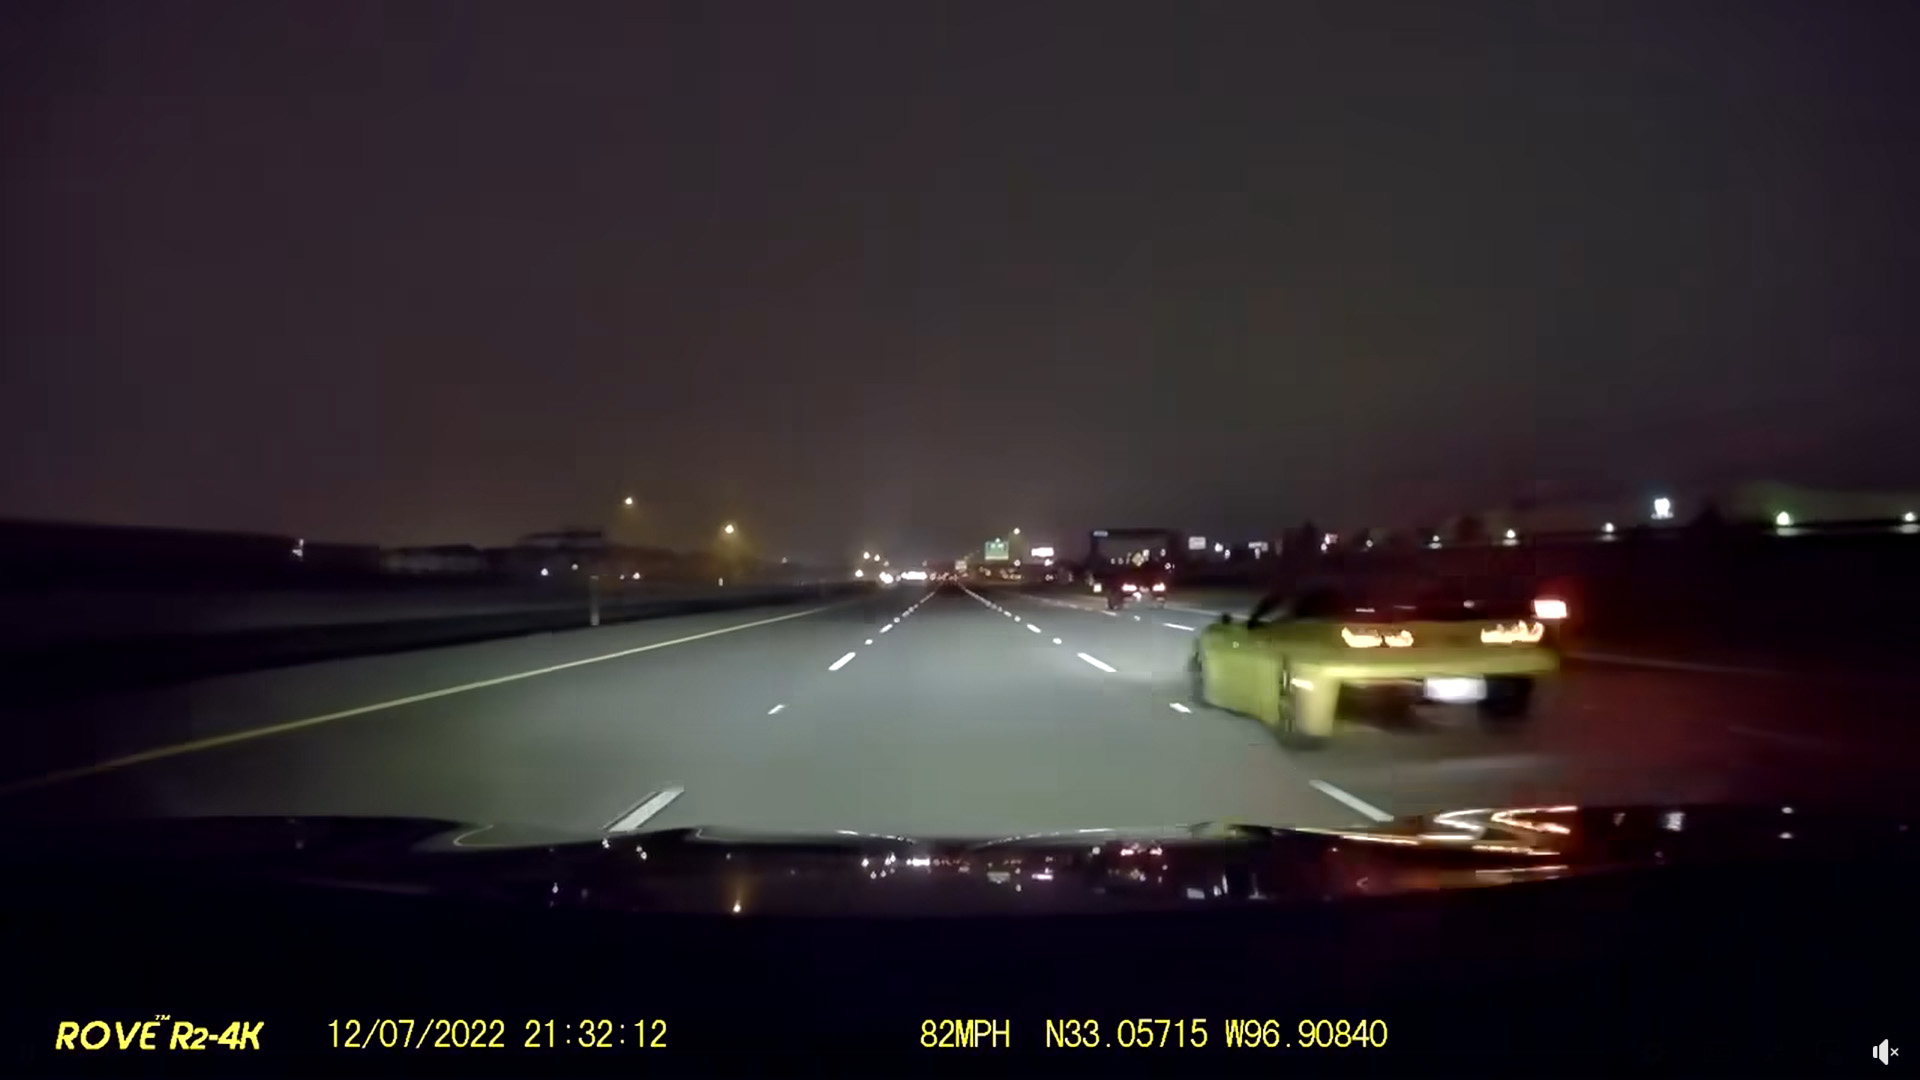 Getting Rear-Ended While Stopped